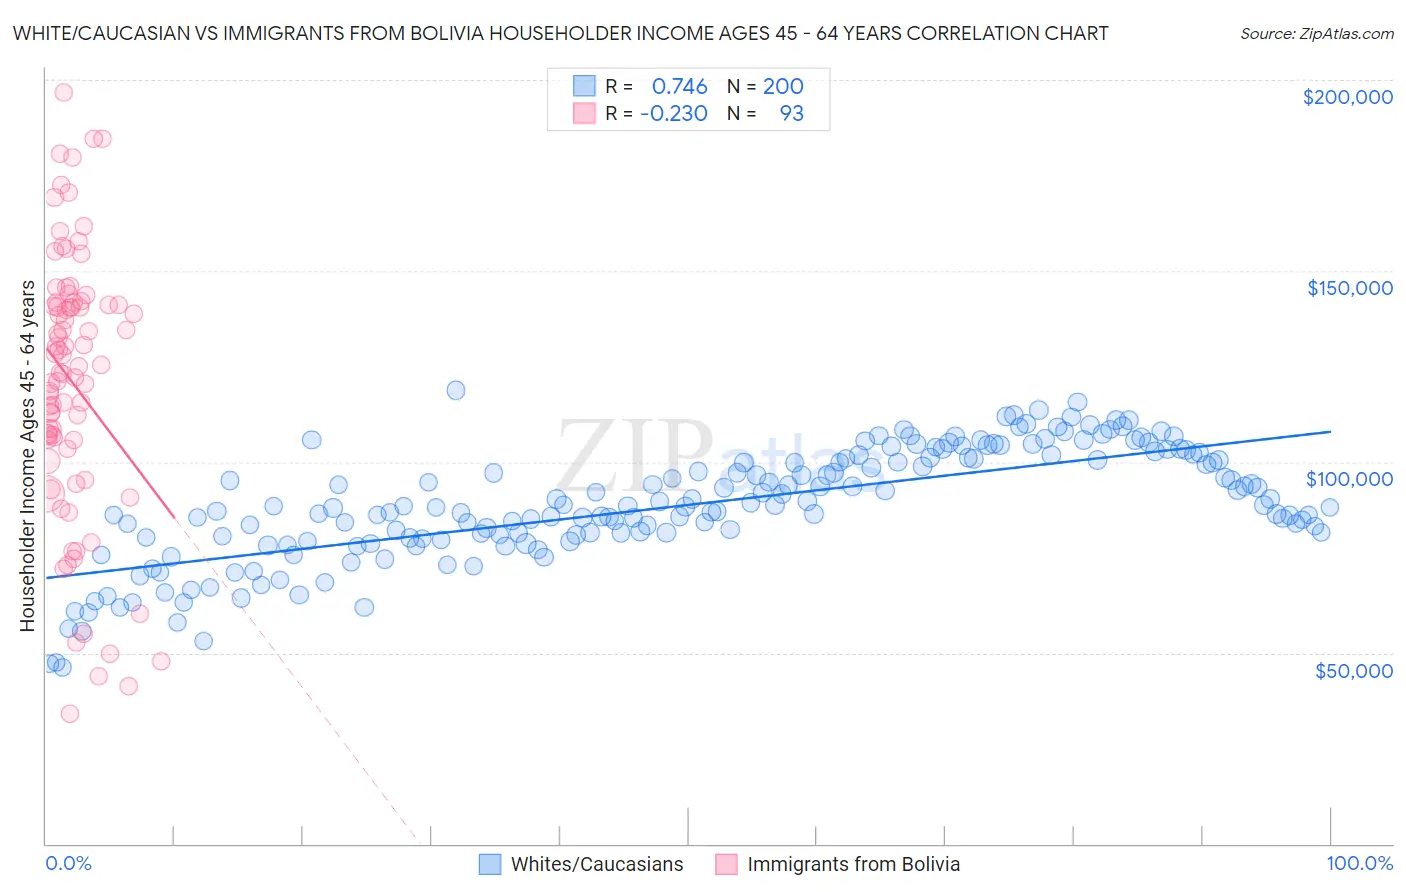 White/Caucasian vs Immigrants from Bolivia Householder Income Ages 45 - 64 years